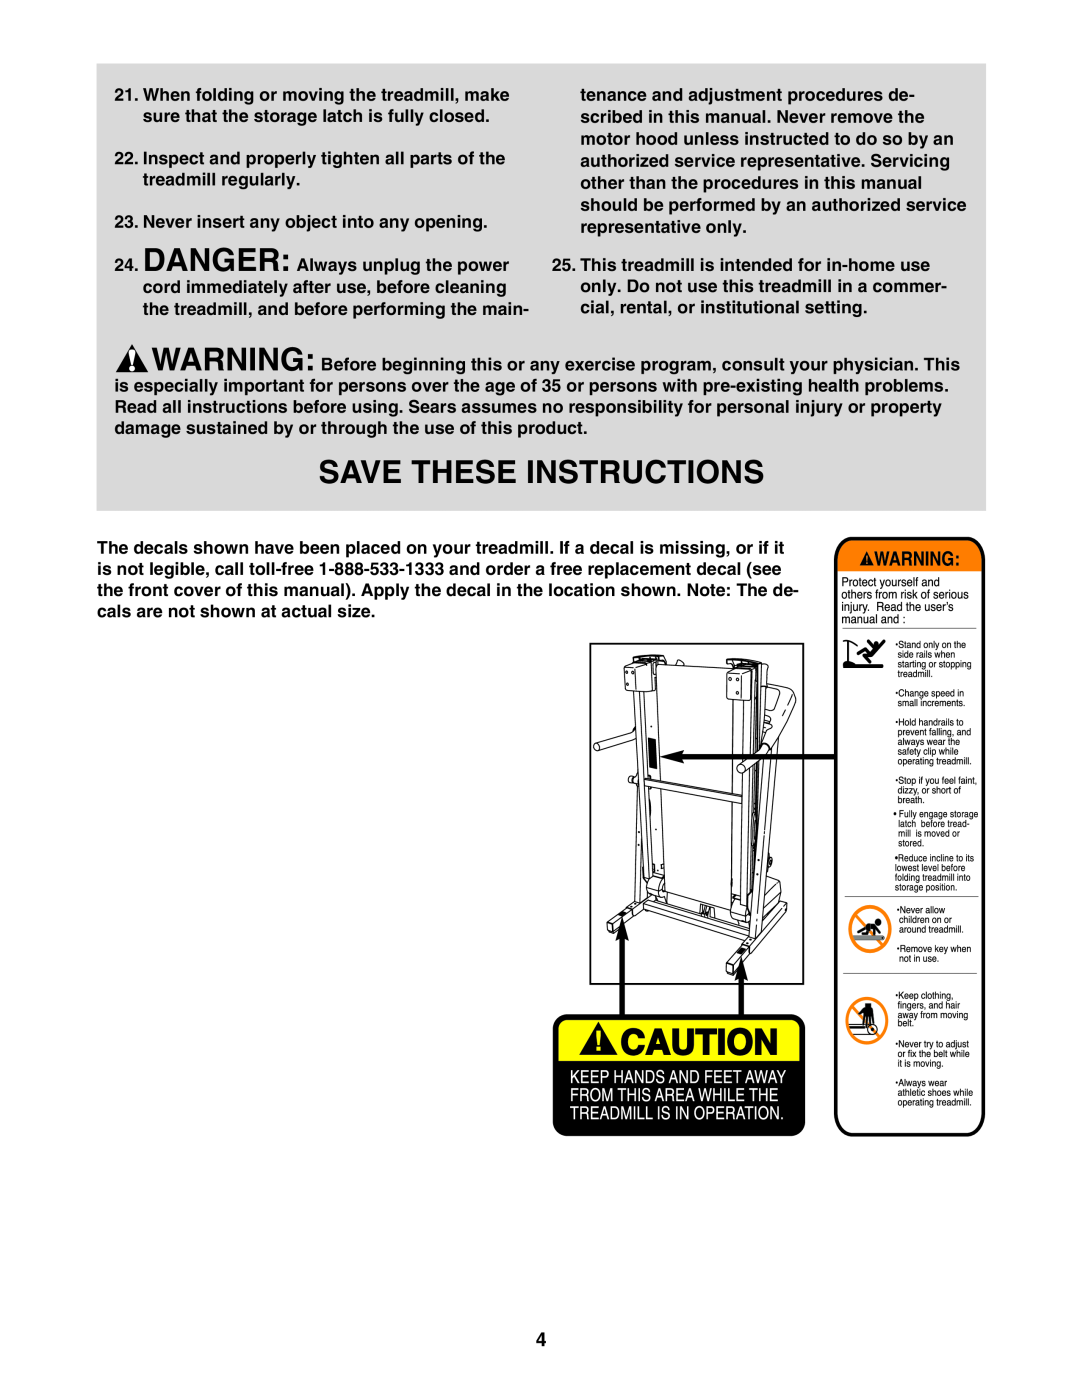 ProForm 831.29623.0 user manual Save These Instructions, Inspect and properly tighten all parts of the treadmill regularly 